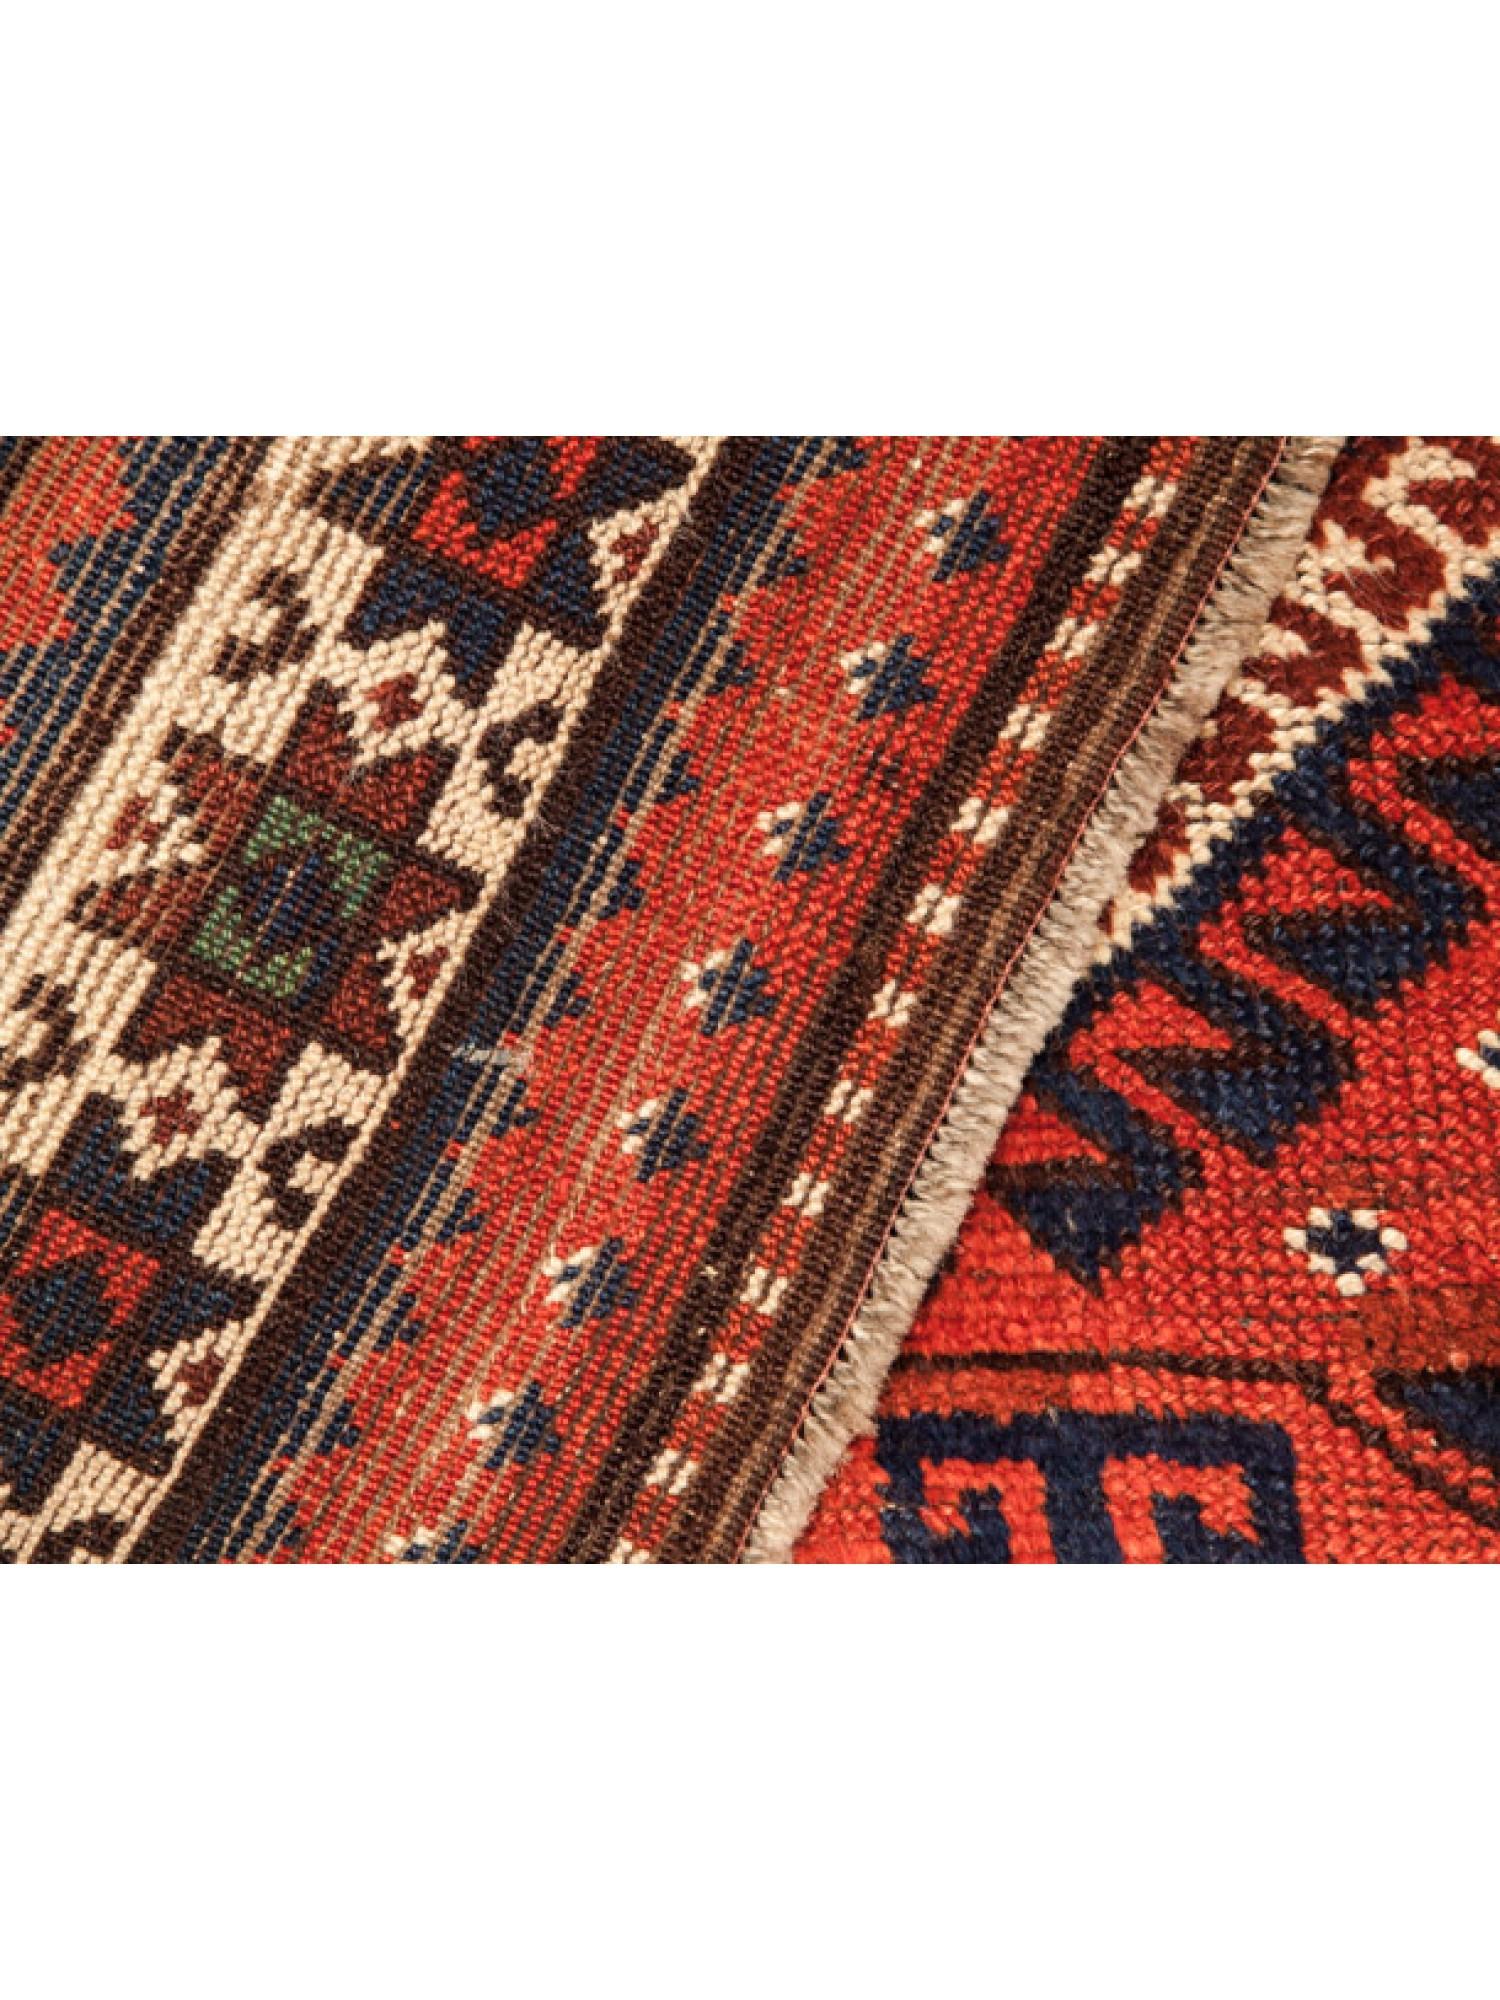 This is an Antique Kurdish Runner Rug from the Eastern Anatolia region with a rare and beautiful color composition.

Anatolian Kurdish rugs are handwoven rugs that originate from the Anatolian regions of Turkey and are associated with the Kurdish